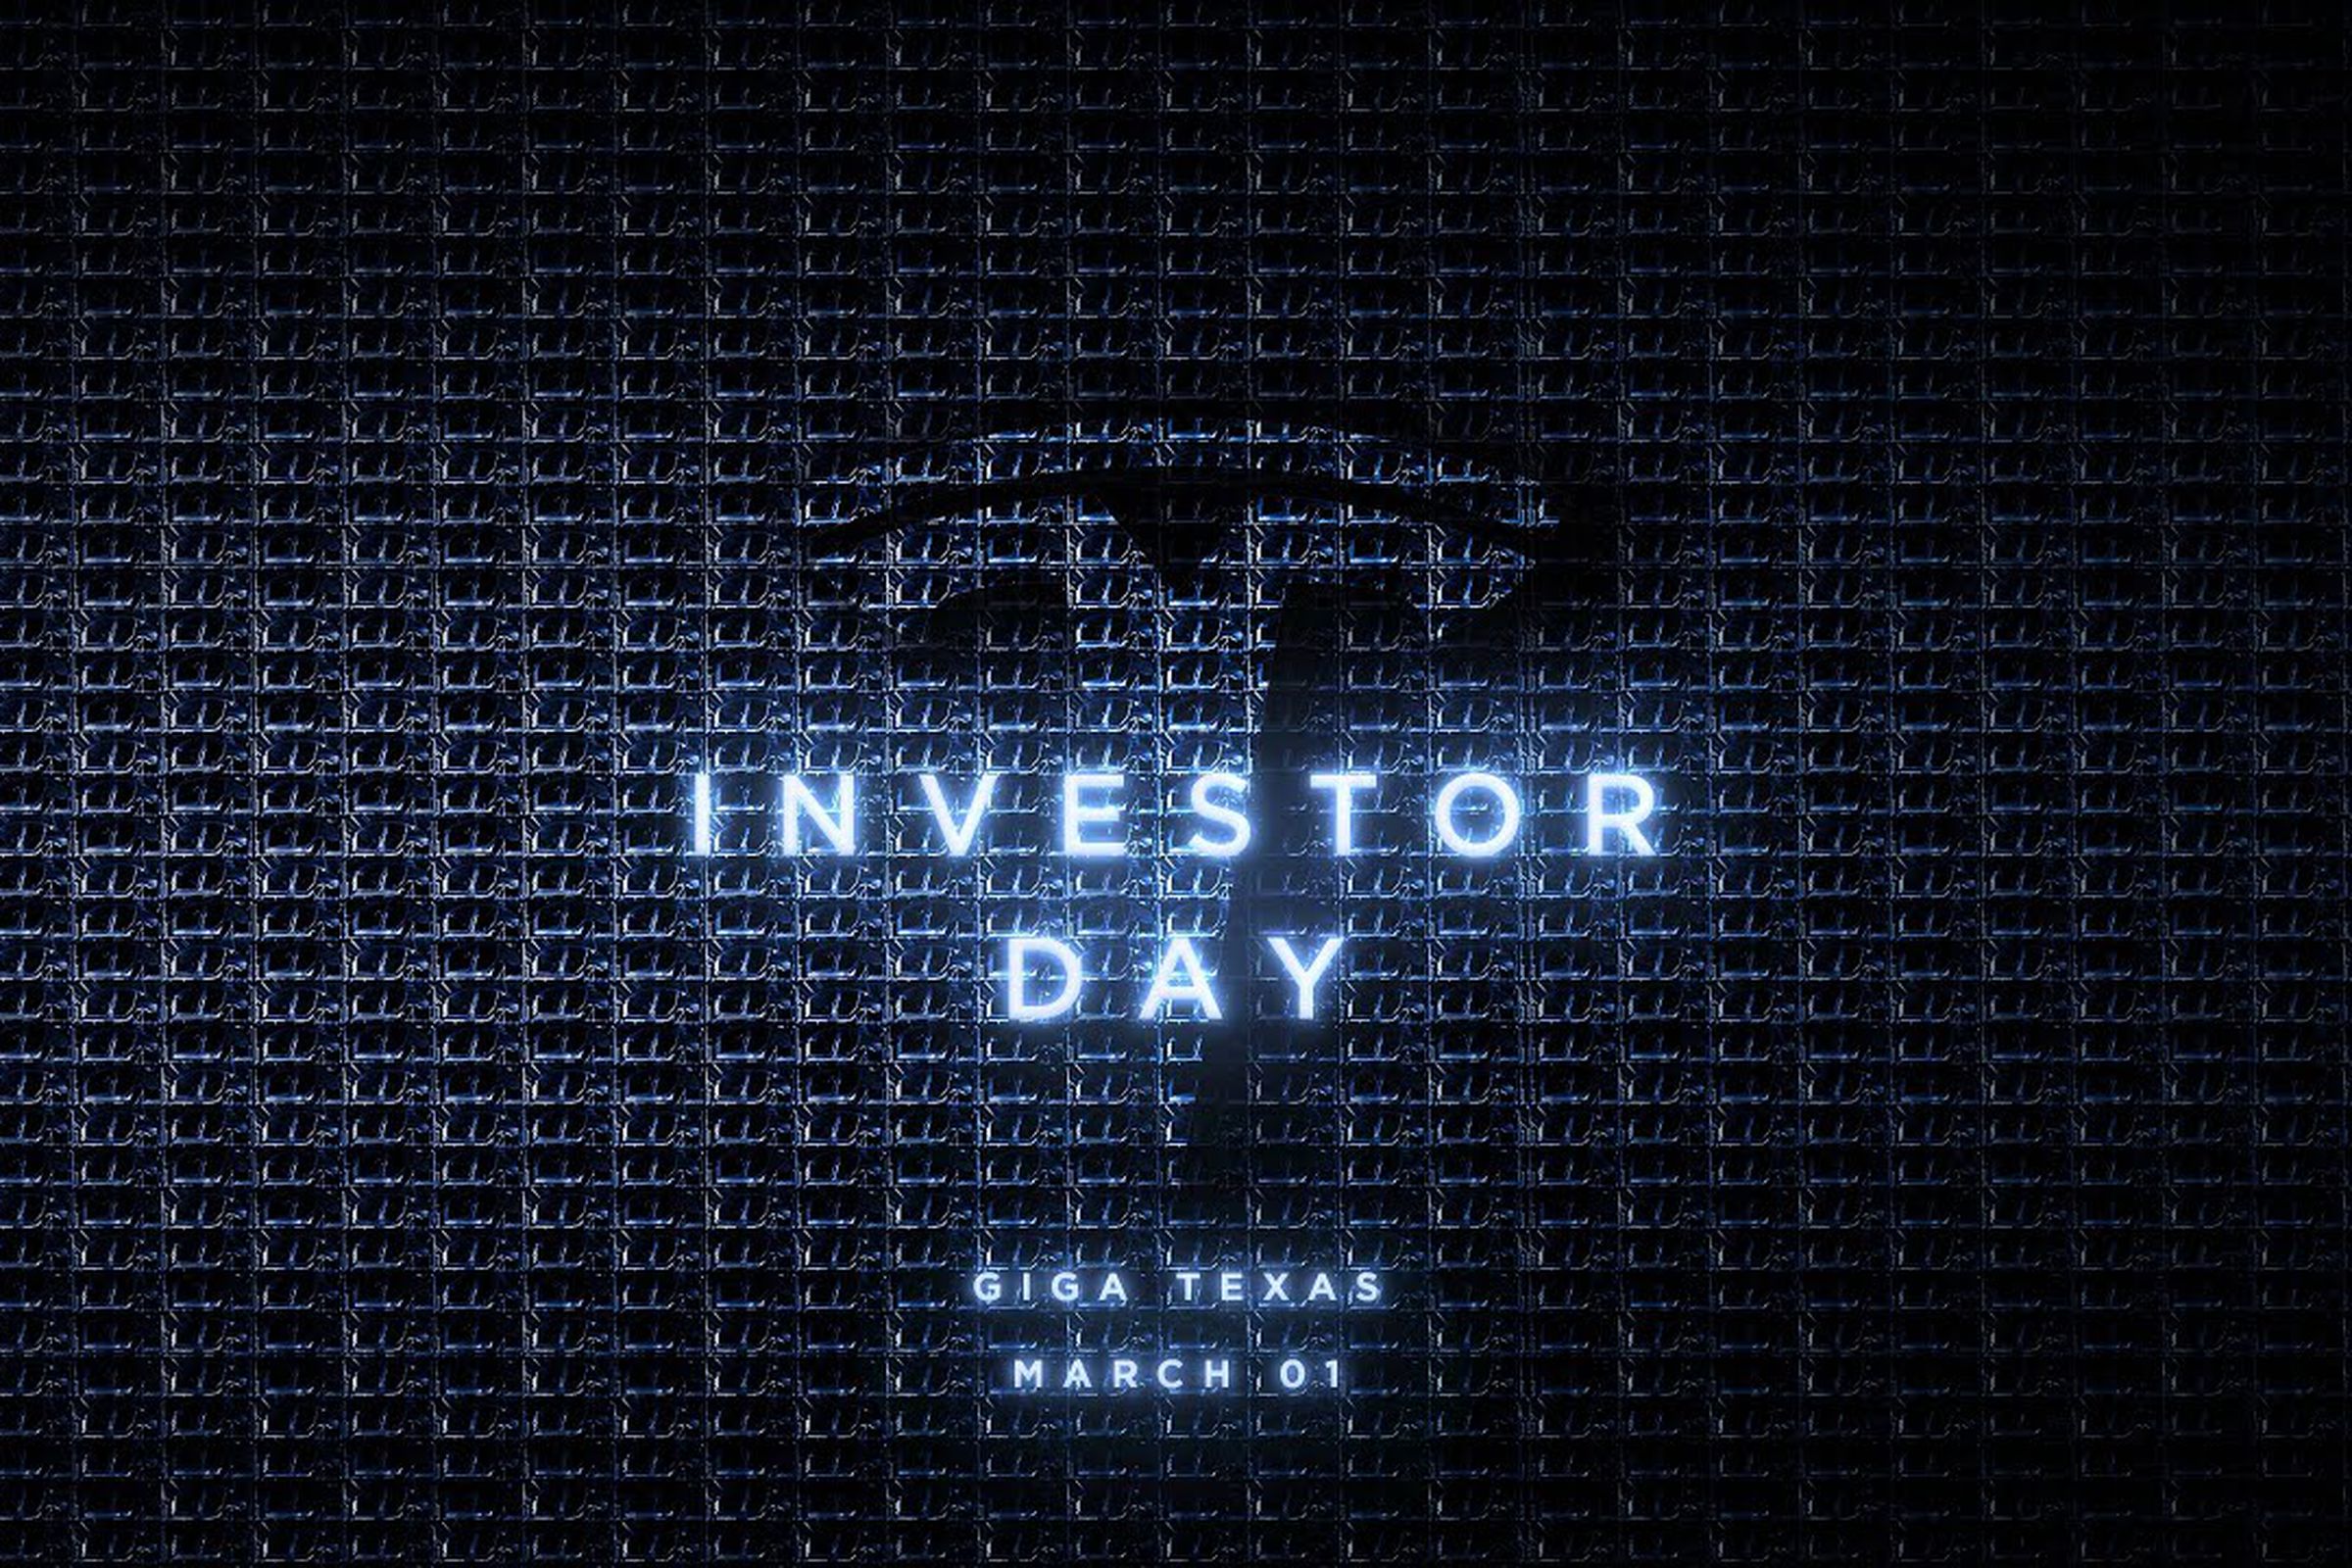 Tesla investor day splash image, say Giga Texas and March 01 date.